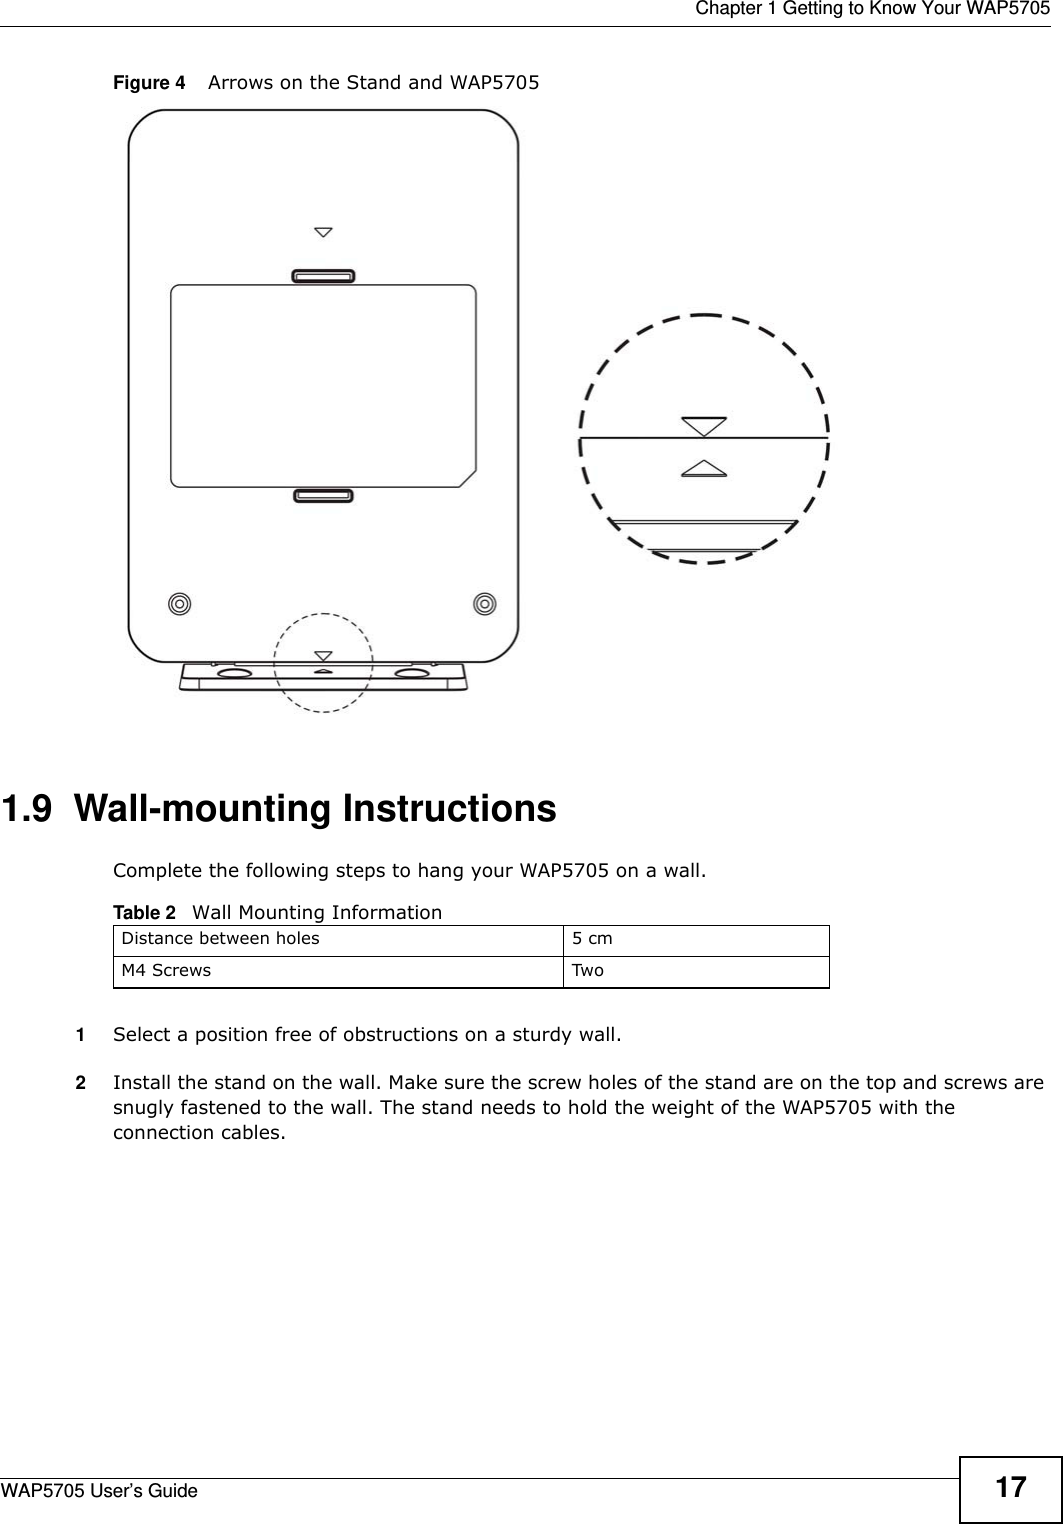  Chapter 1 Getting to Know Your WAP5705WAP5705 User’s Guide 17Figure 4    Arrows on the Stand and WAP5705 1.9  Wall-mounting InstructionsComplete the following steps to hang your WAP5705 on a wall.1Select a position free of obstructions on a sturdy wall. 2Install the stand on the wall. Make sure the screw holes of the stand are on the top and screws are snugly fastened to the wall. The stand needs to hold the weight of the WAP5705 with the connection cables. Table 2   Wall Mounting InformationDistance between holes 5 cmM4 Screws Two